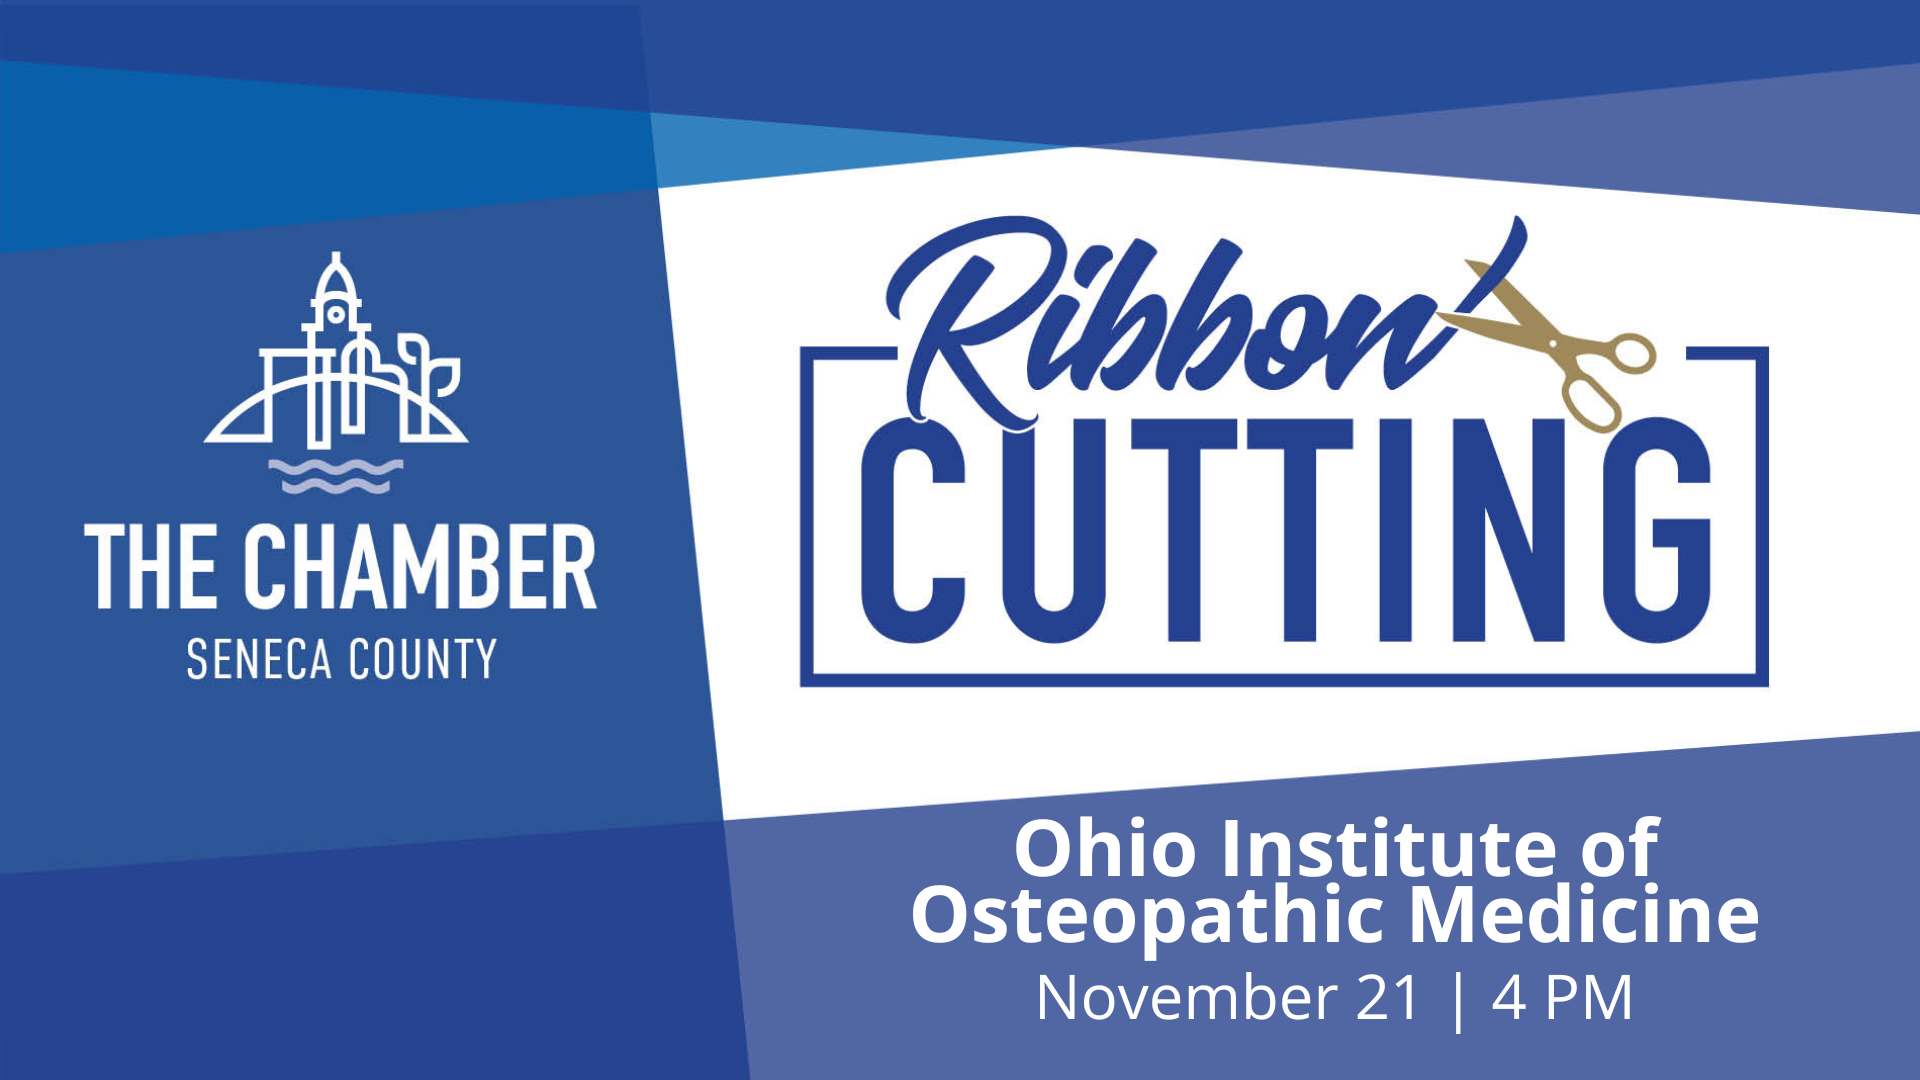 Ribbon Cutting & Open House Ohio Institute of Osteopathic Medicine